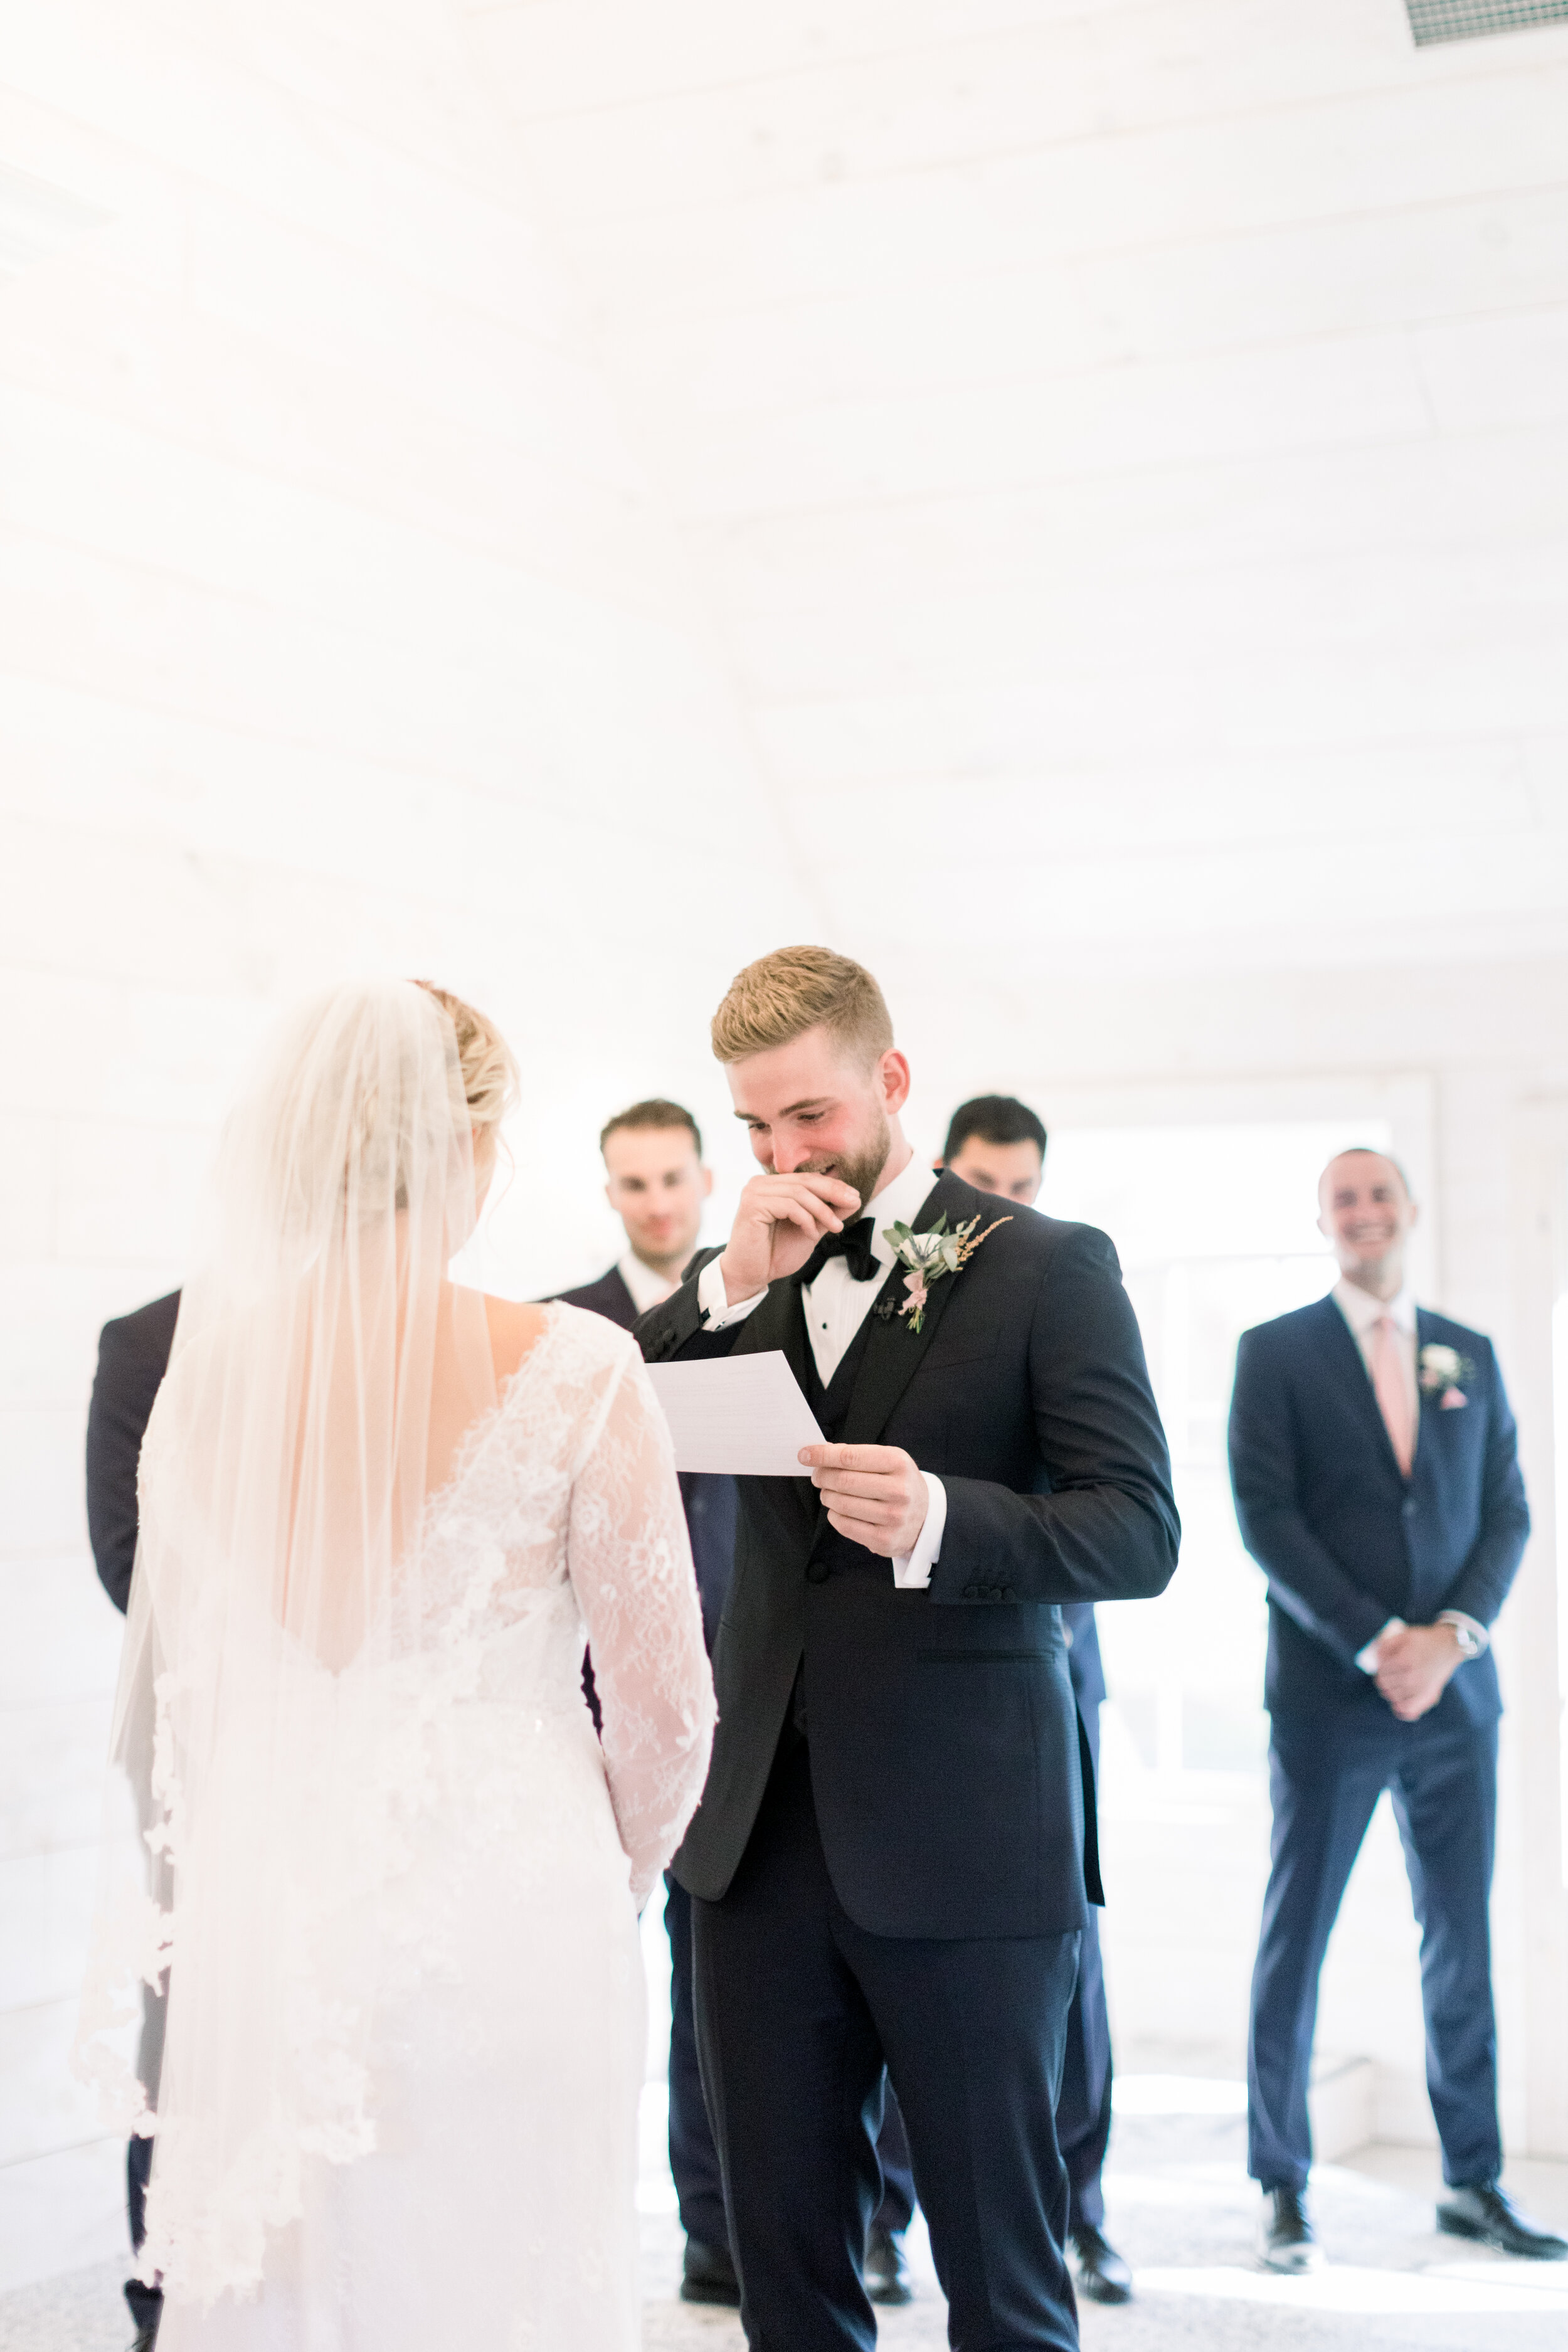  Handsome groom in a black bowtie getting emotional as he reads his wedding vows to his blushing bride in a stunning white wedding dress and a midlength lace trimmed veil at stonefield wedding venue. Wedding vows emotional groom reading vows intimate